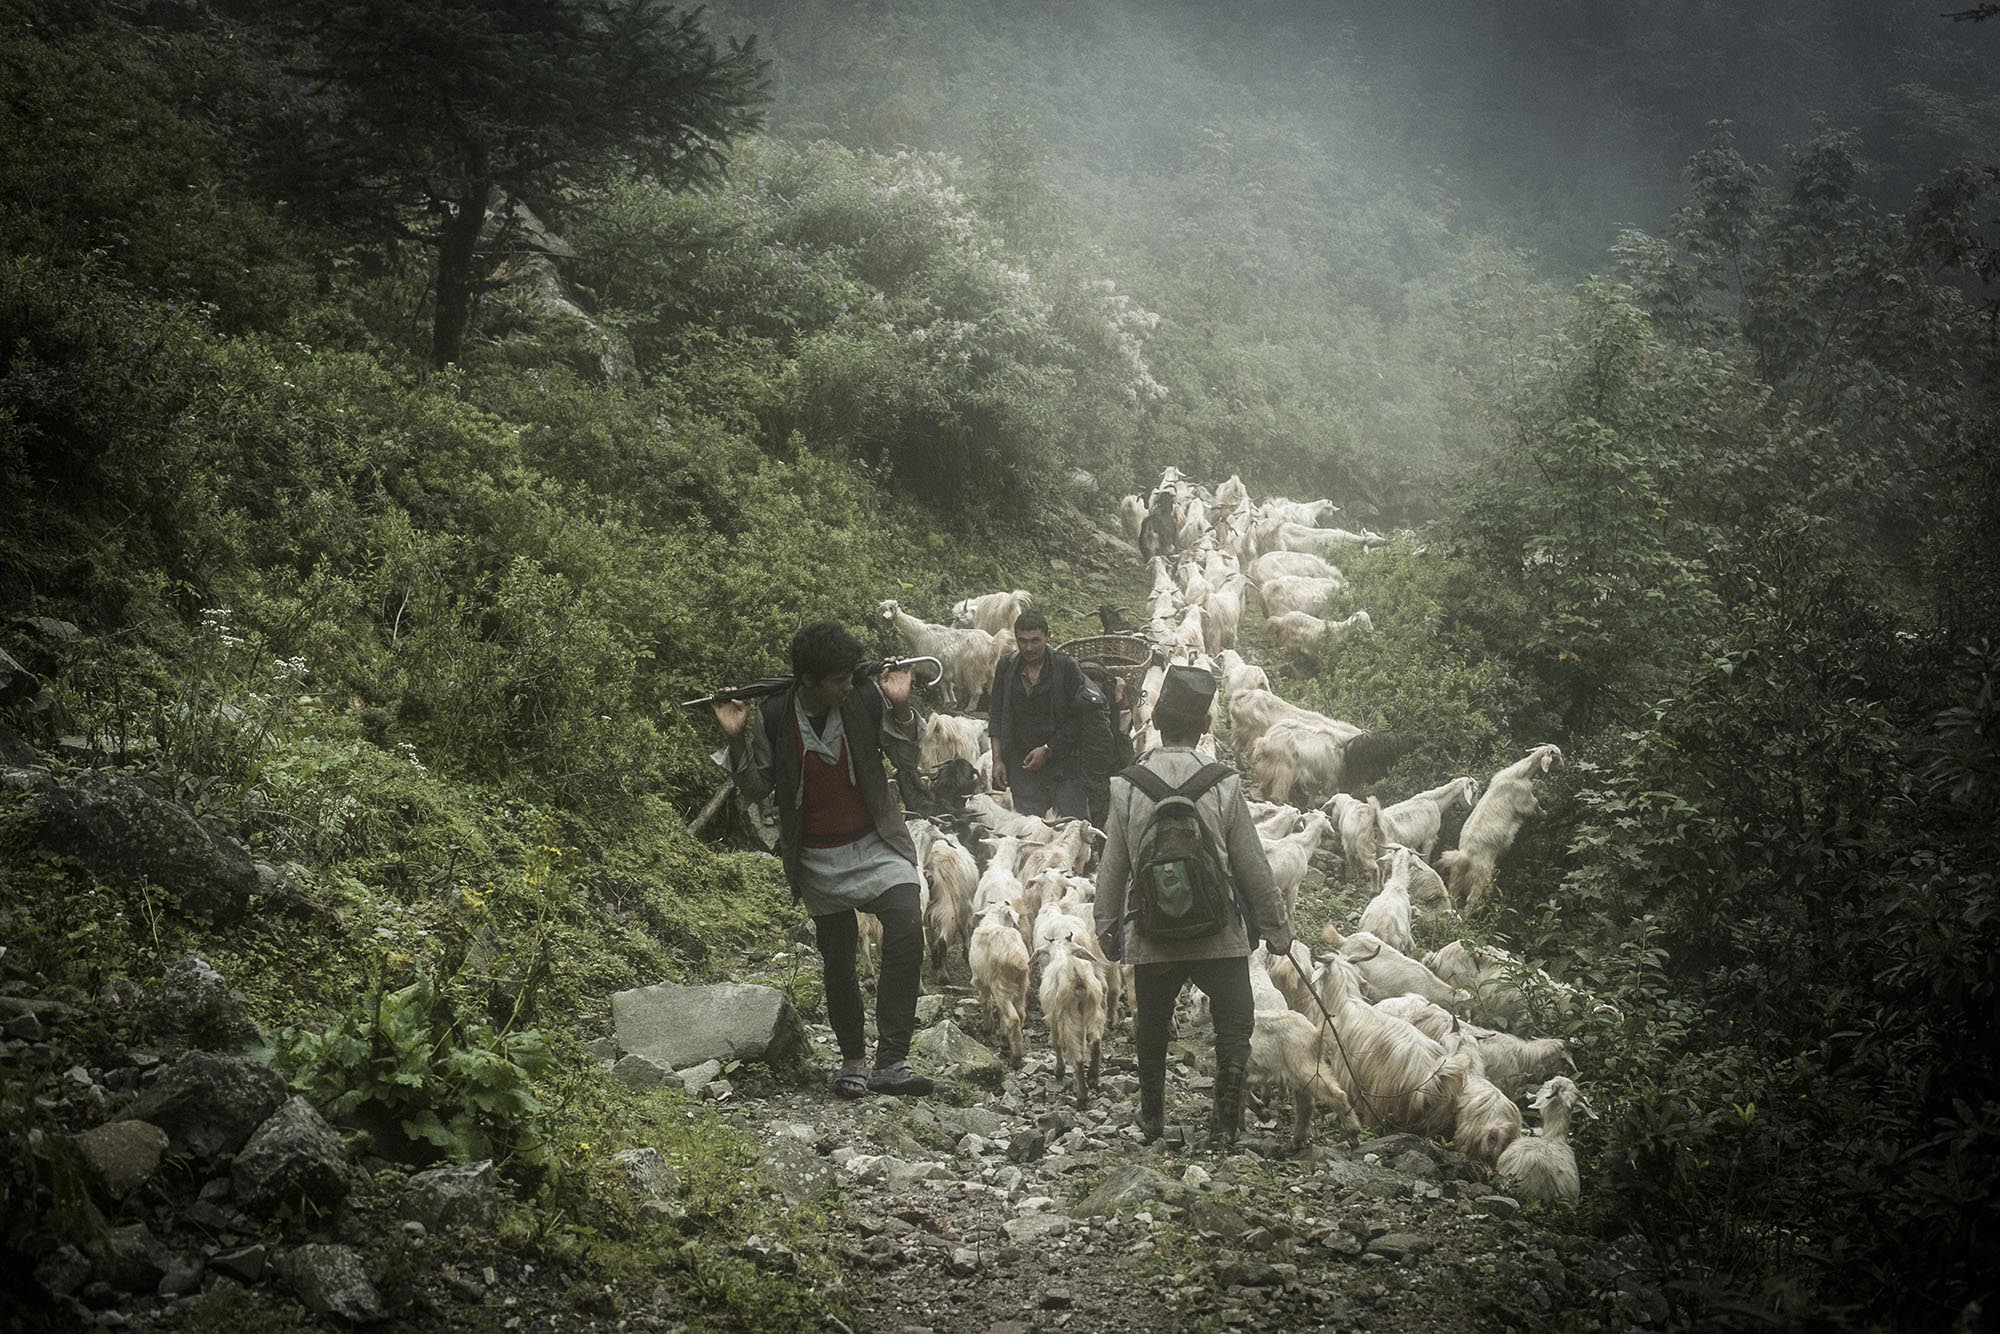 A herder migrates from the higher altitude to escape the cold winter along with his herd towards the lower grazeland in Mane Kharka. Sindhupalchowk, Nepal. 2015.